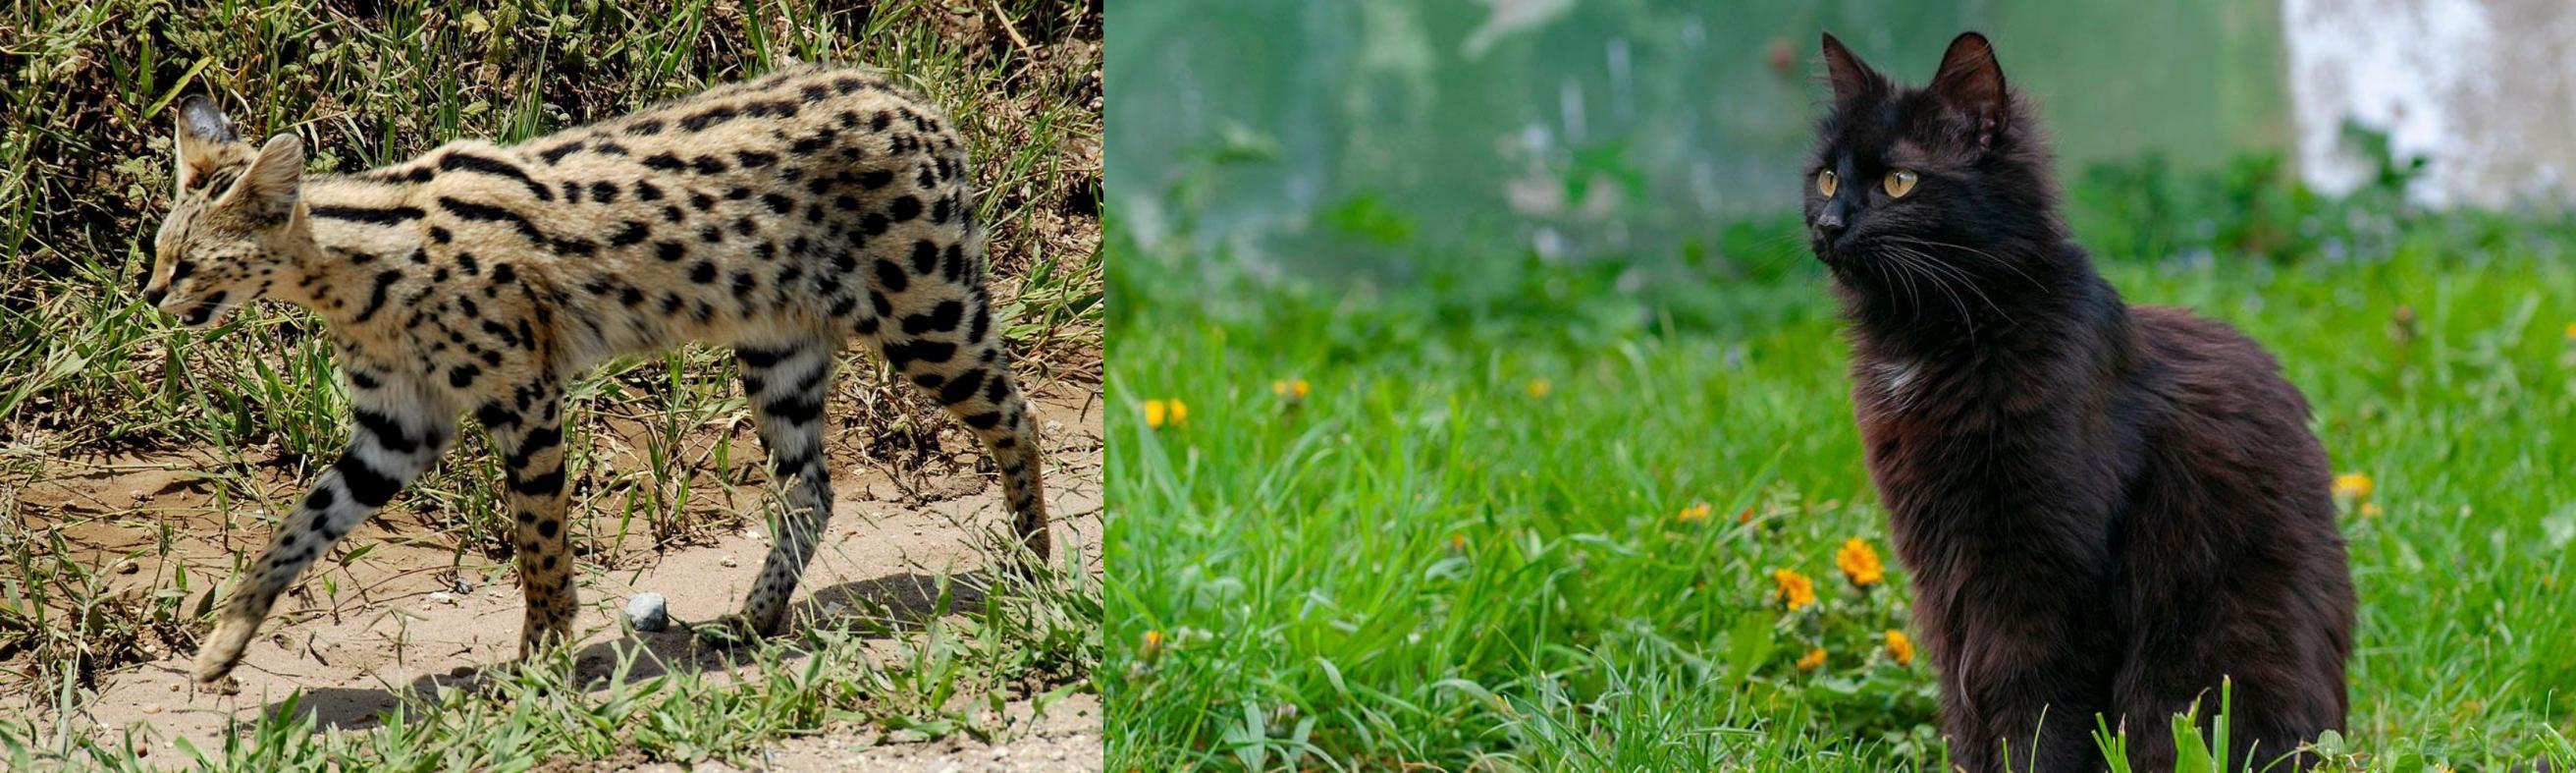 York Chocolate Cat vs African Serval Breed Comparison